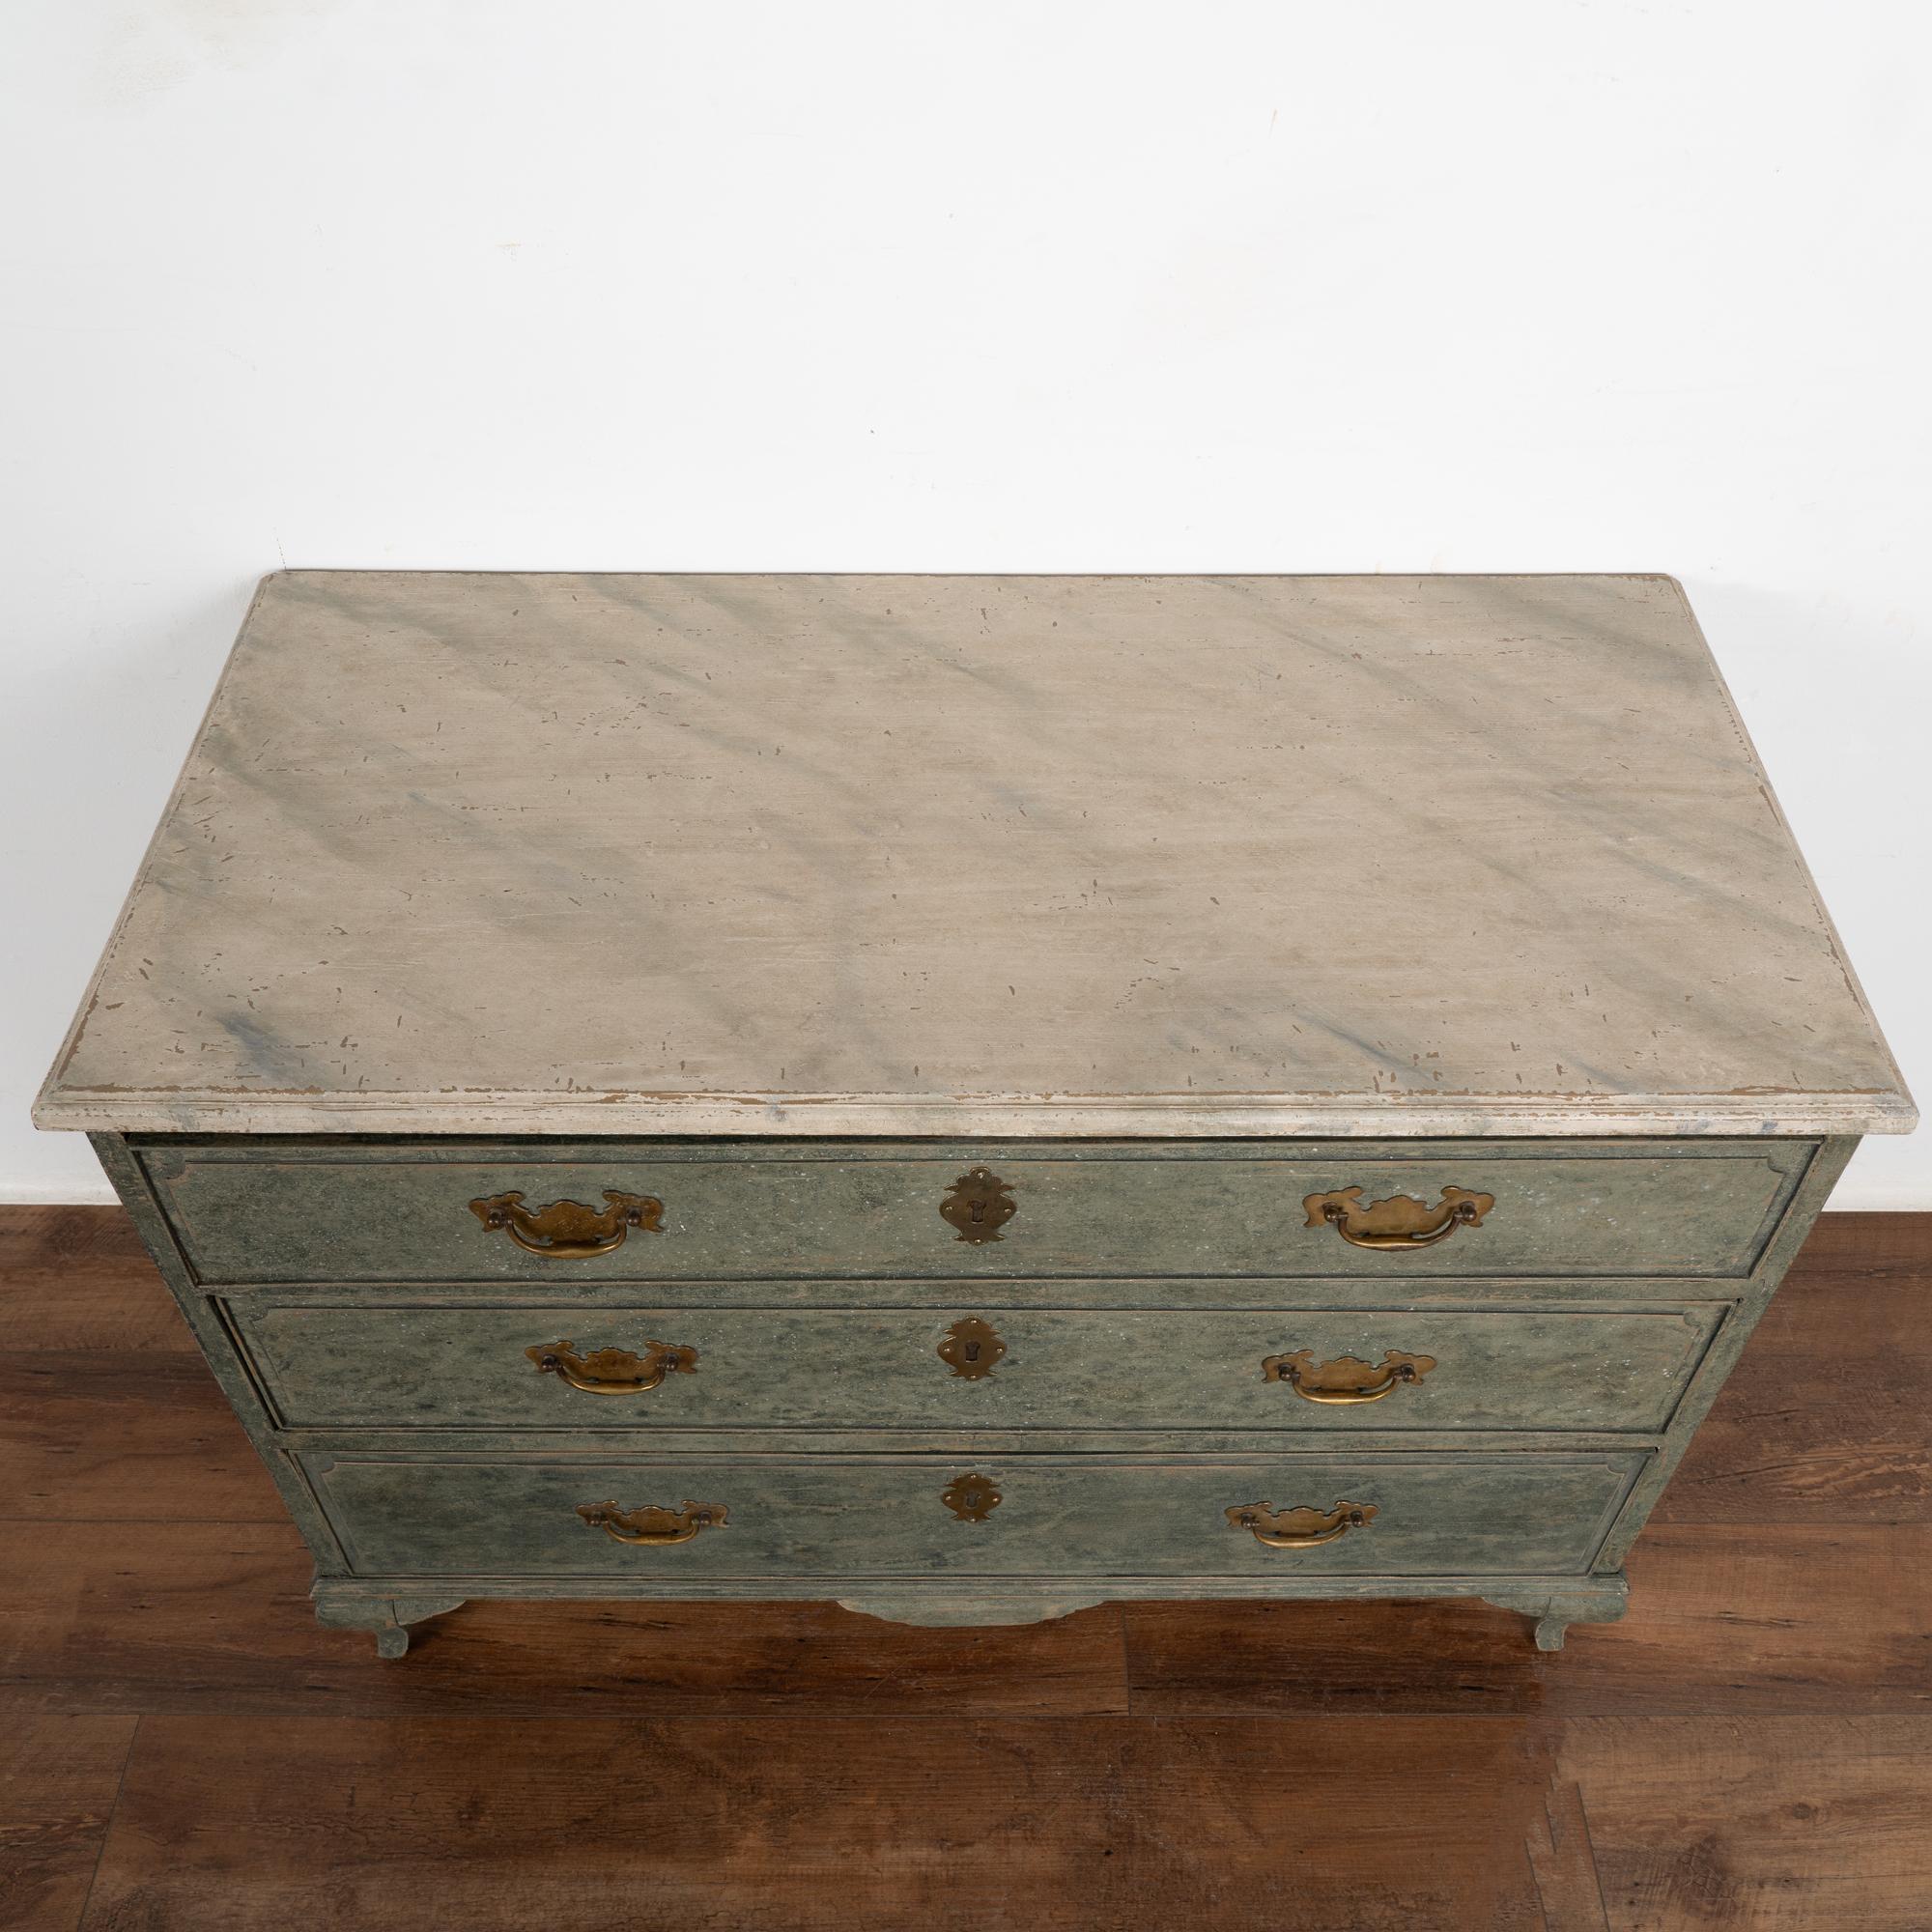 Swedish Painted Chest of Three Drawers, Sweden circa 1820-40